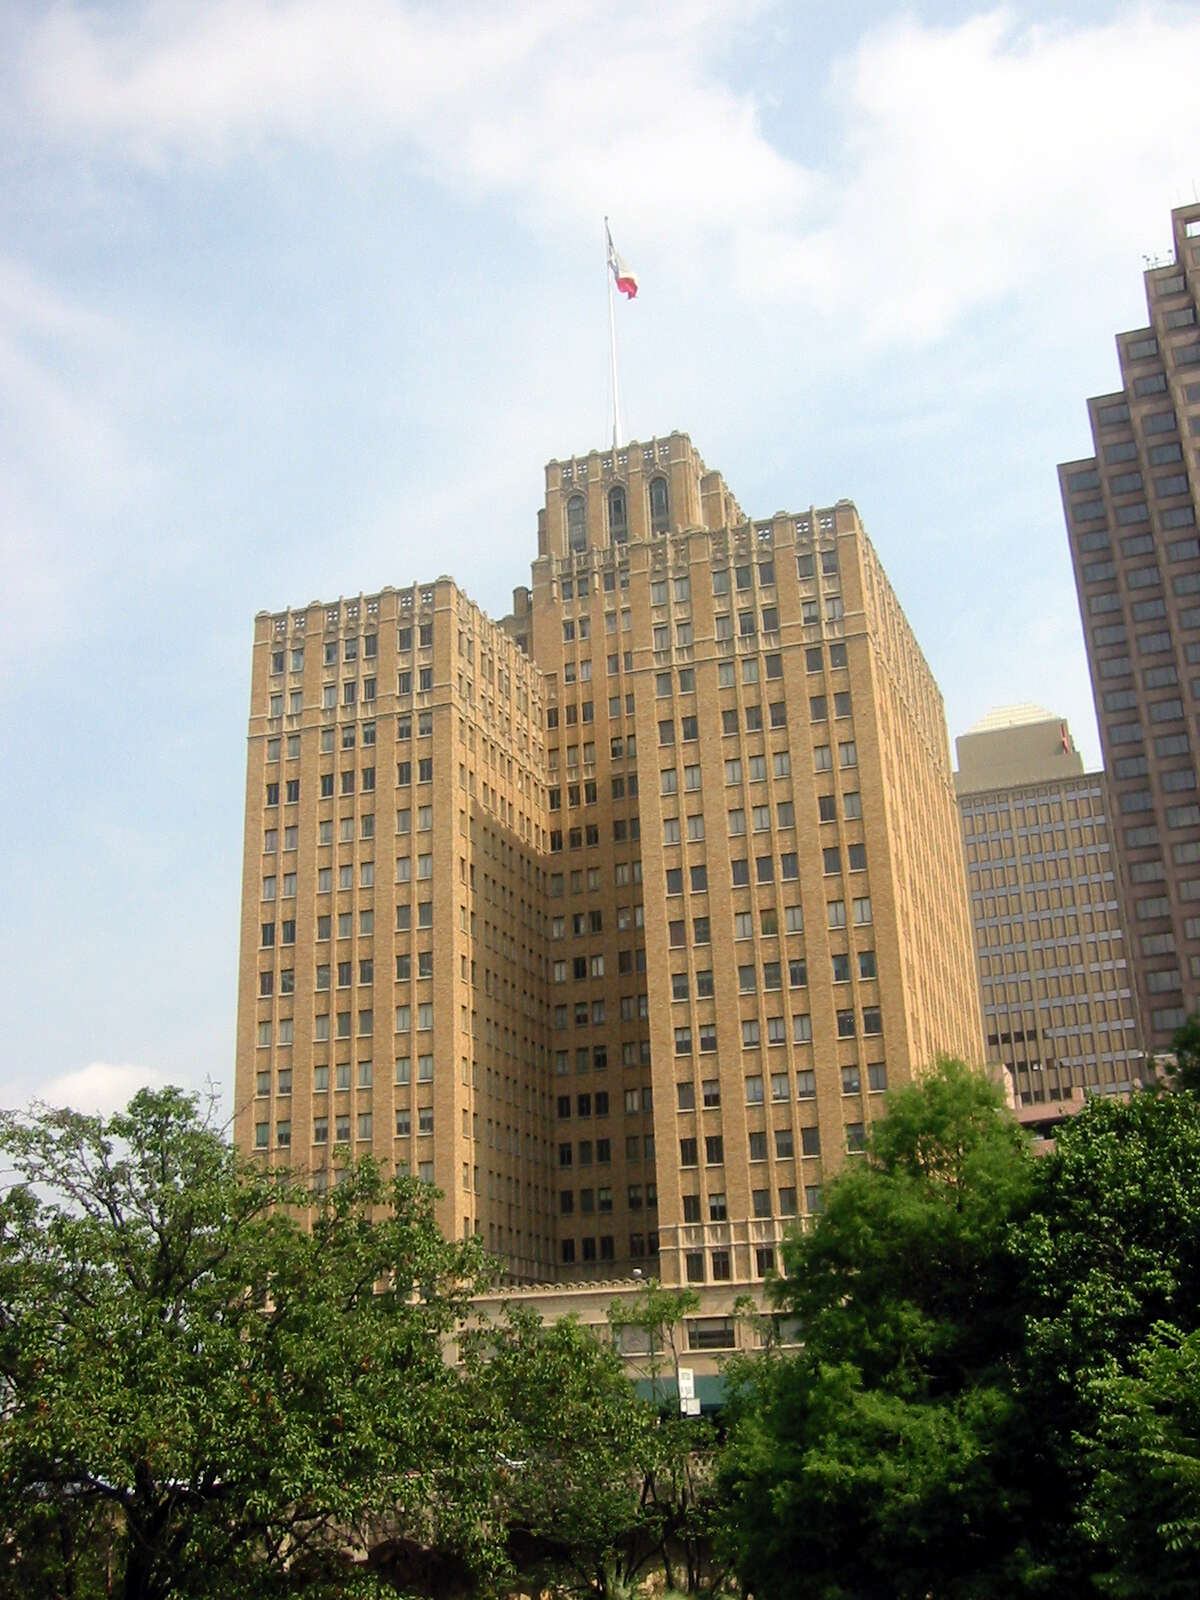 In March, Weston Urban bought the history 21-story Milam Building, a block away from the future Frost Tower.